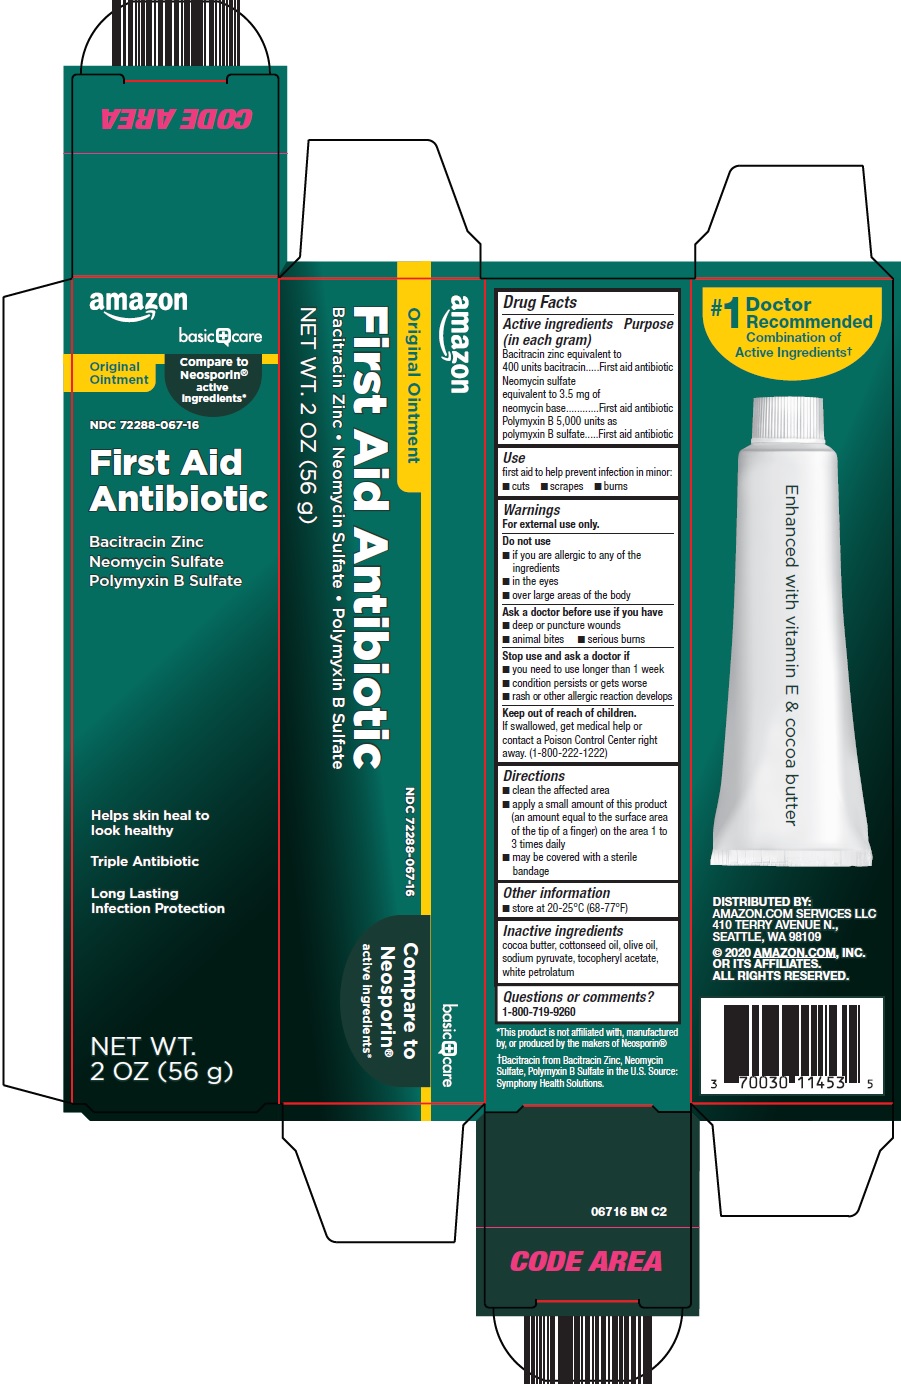 first aid anitbiotic image